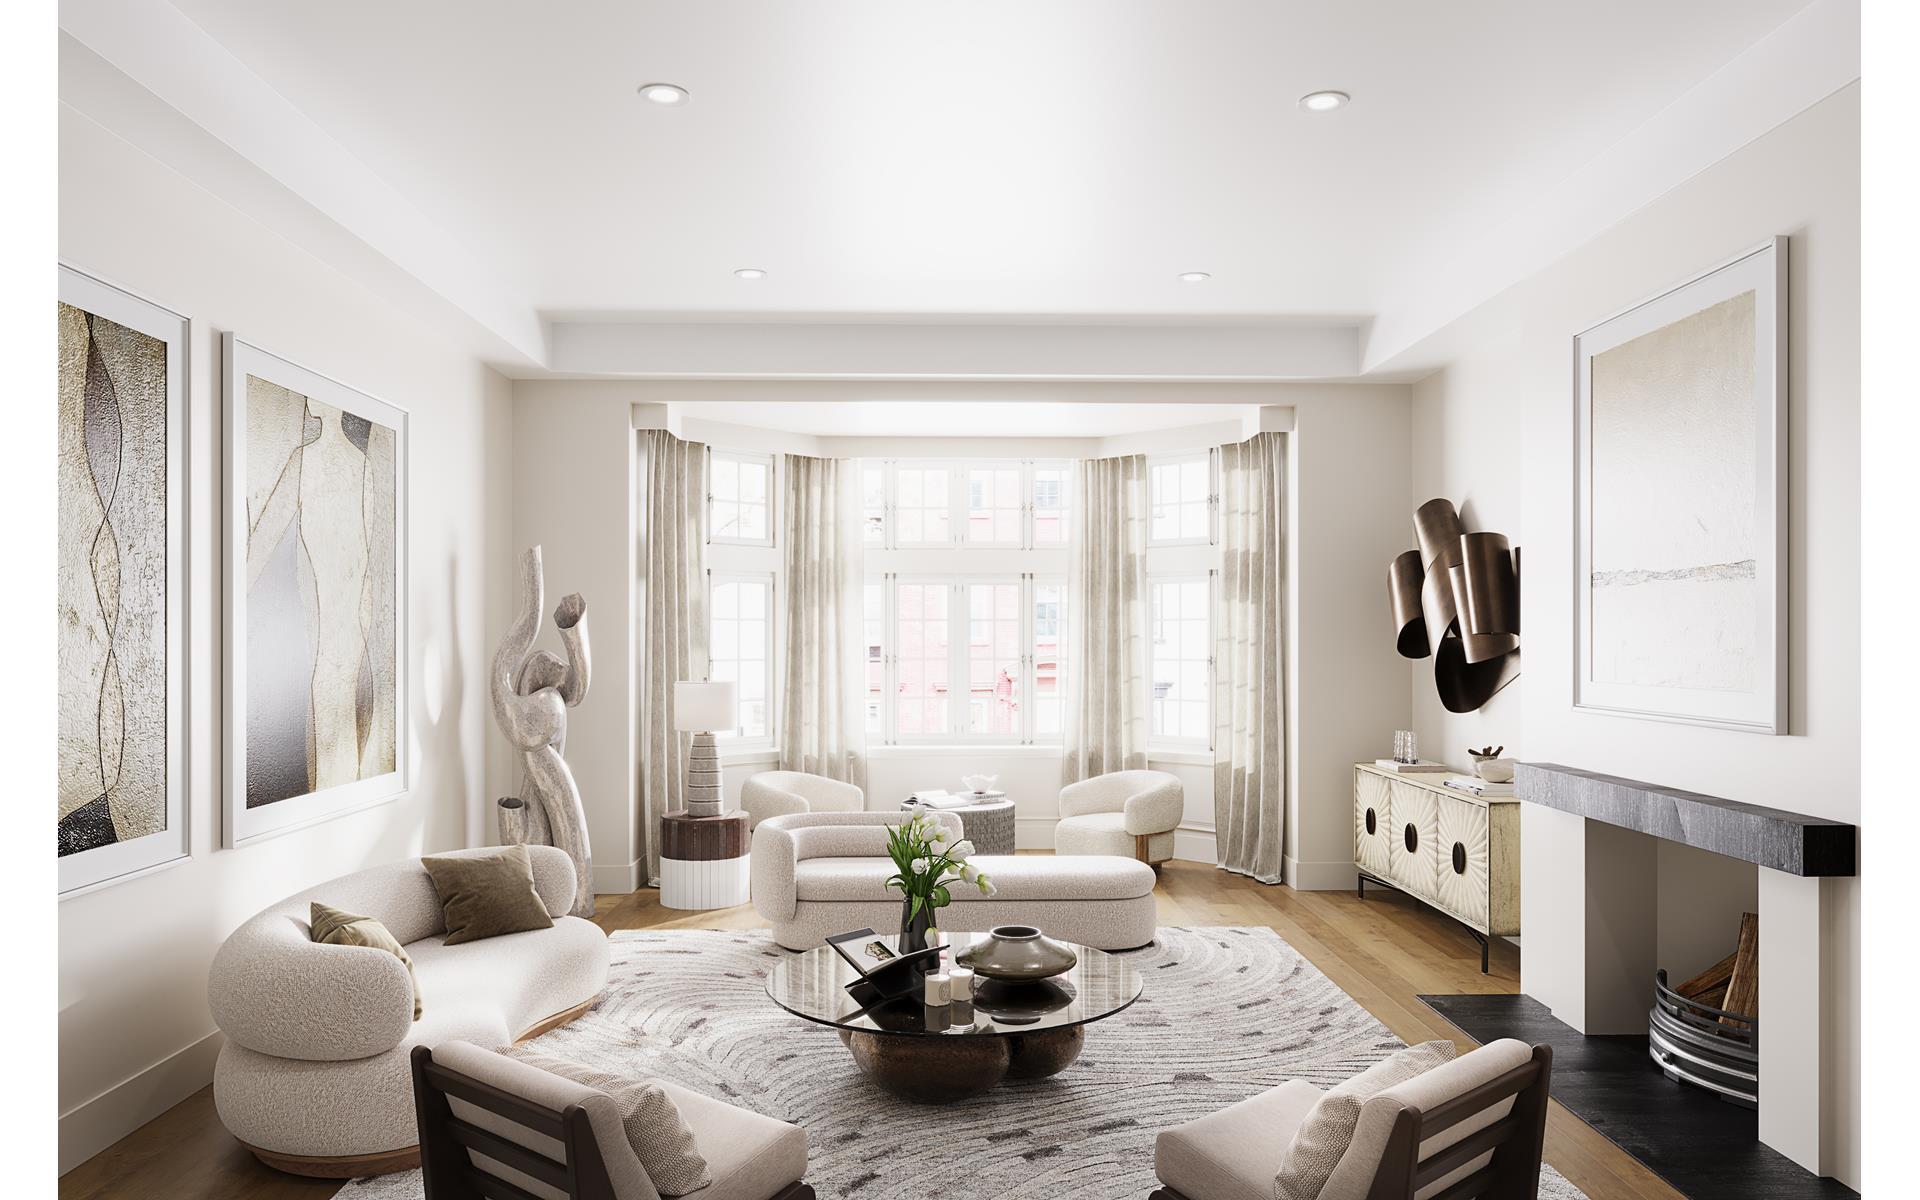 7 East 69th Street, Lenox Hill, Upper East Side, NYC - 6 Bedrooms  
6.5 Bathrooms  
16 Rooms - 